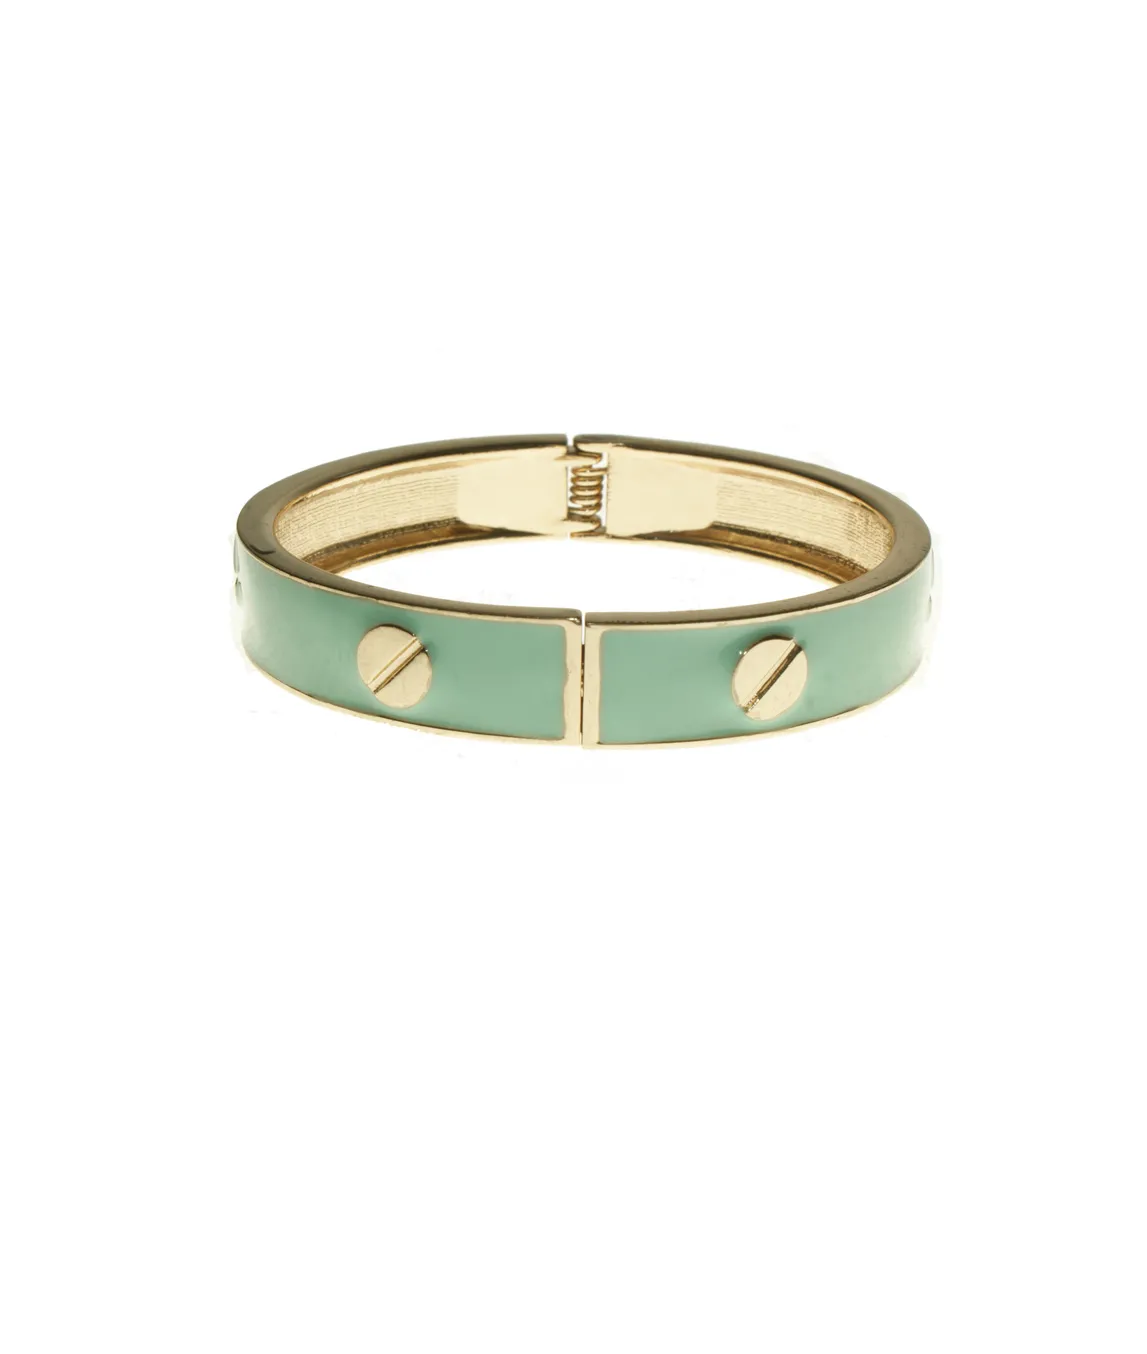 Pistachio green bangle with gold detail